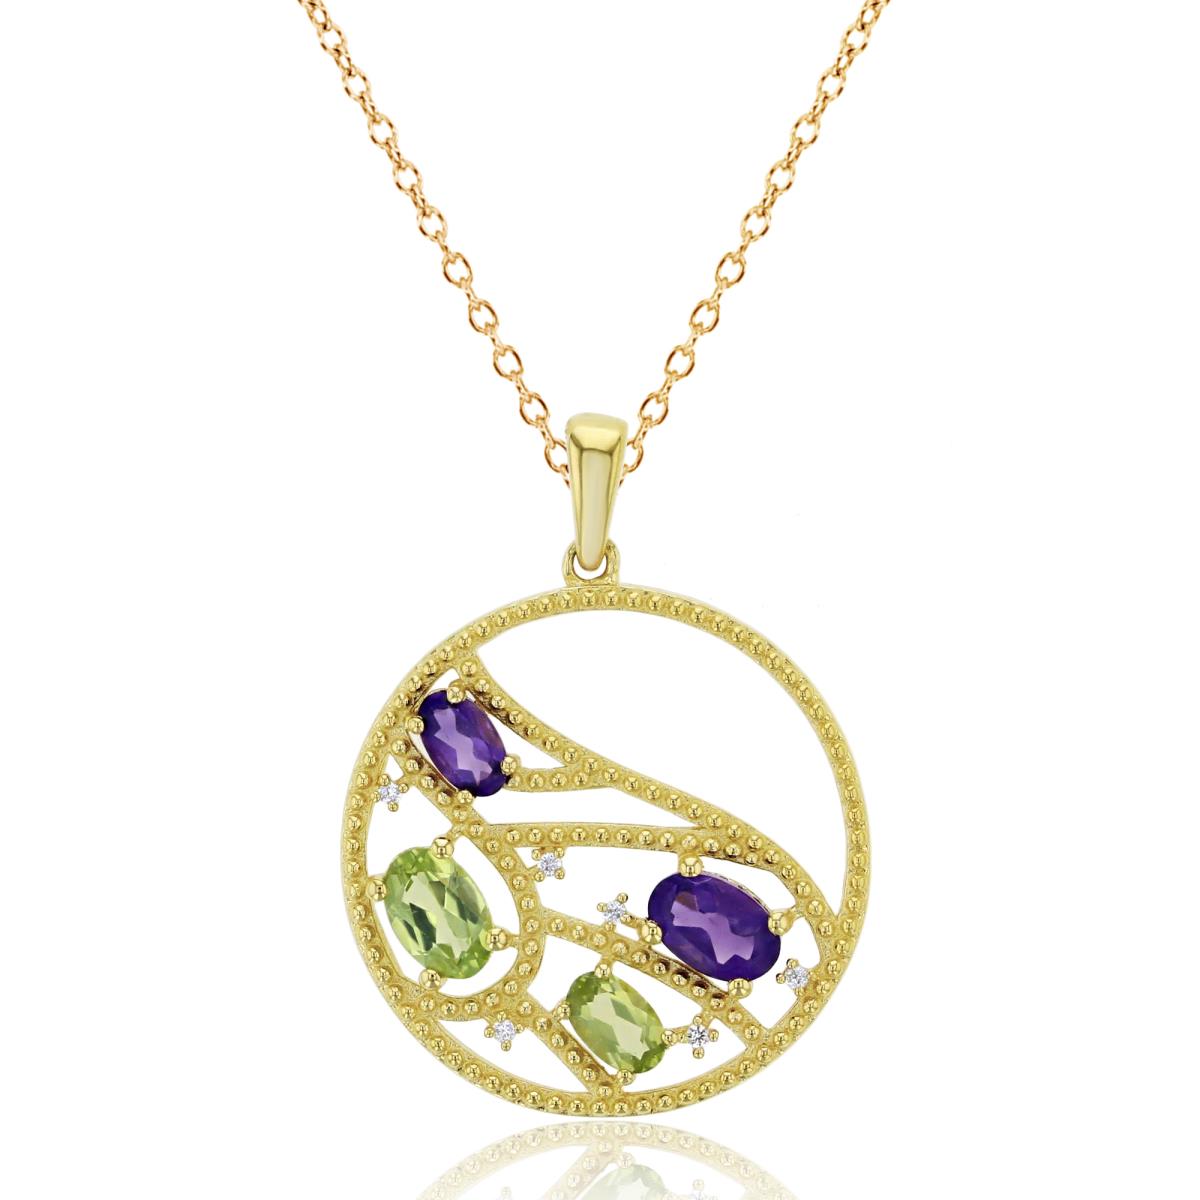 Sterling Silver +14KY GOS  0.03cttw Rnd Diamonds & Ov Amethyst/Peridot Beaded Circle 18"Necklace